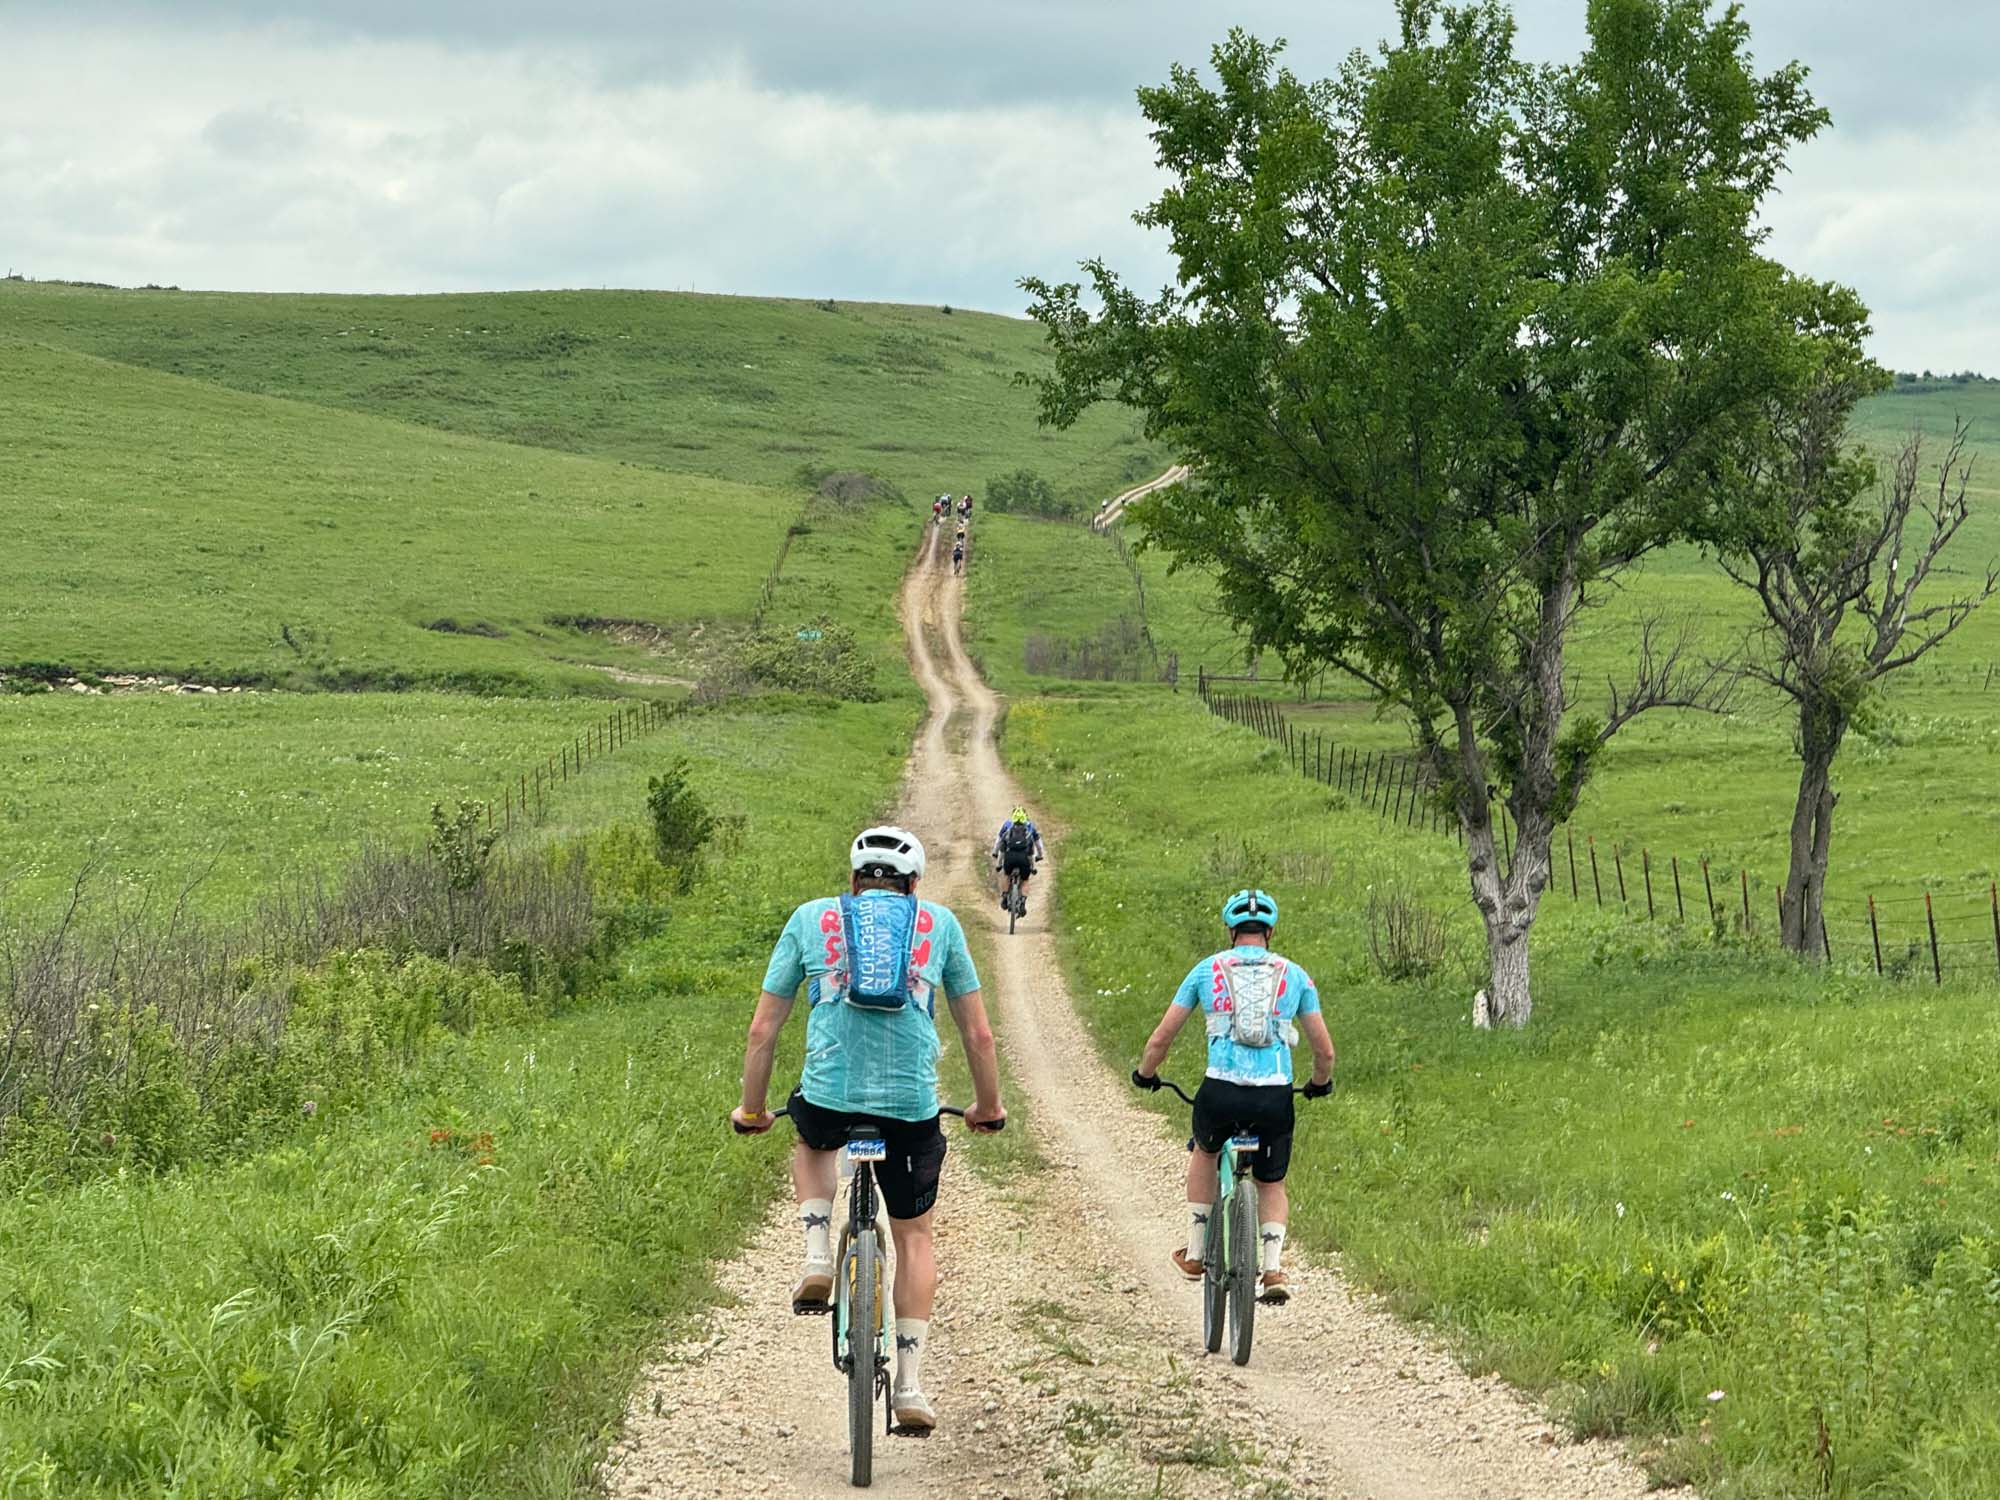 Two riders on a rough gravel road through rolling hills.